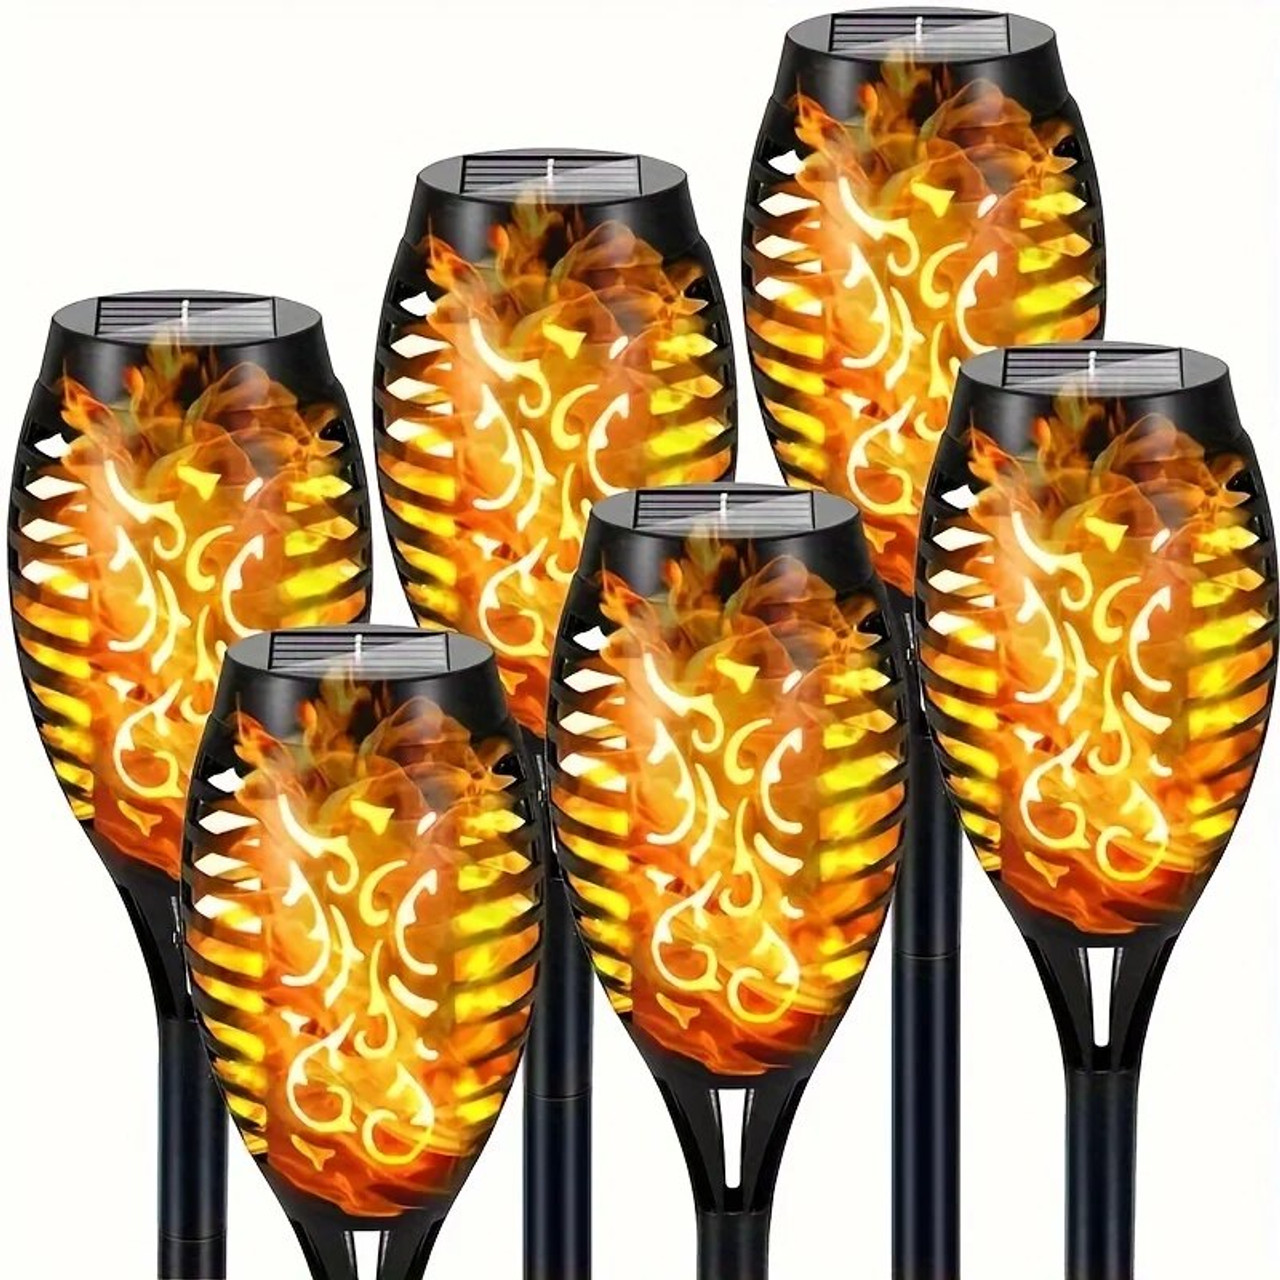 Solar Flame Torch Lights for Garden Decor, 6 Pack Solar Lights Outdoor, Garden Lights Solar Powered Waterproof, LED Torches for Outside Decor, Luces Solares Outdoor Decorations for Patio Garden Art